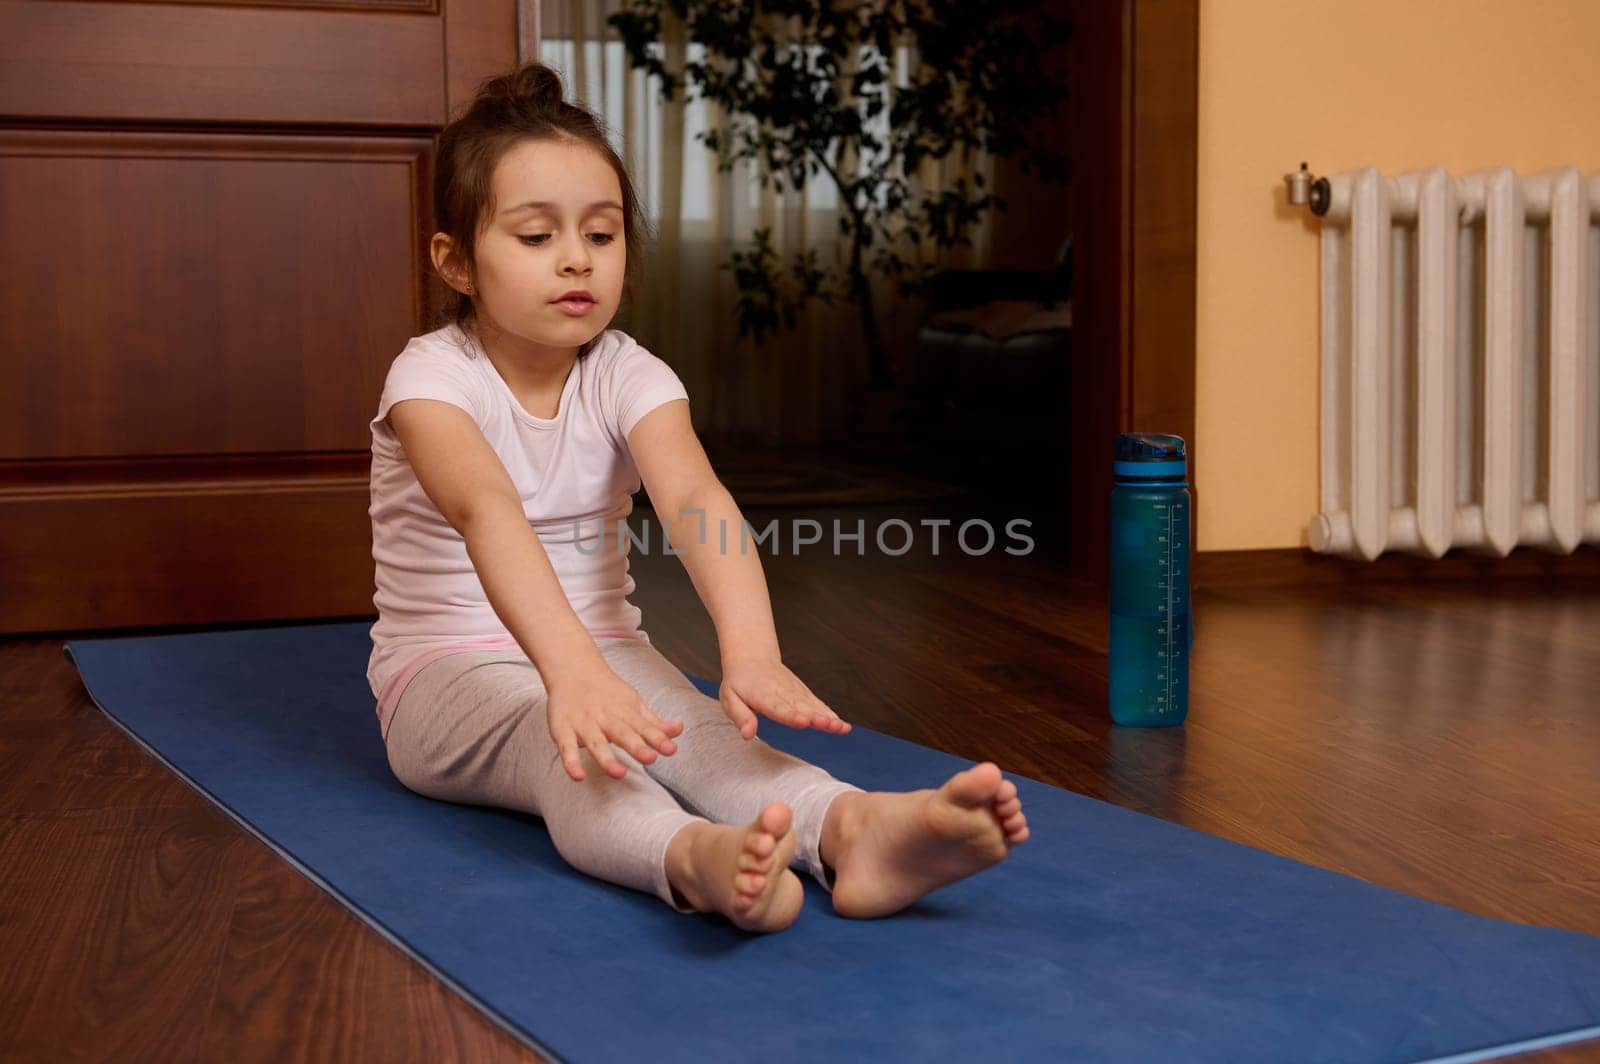 Determined active little kid girl 5-6 years old, exercising barefoot on yoga mat, warming up, stretching her body, doing gymnastic exercises in cozy wooden homely atmosphere. Sport and people concept